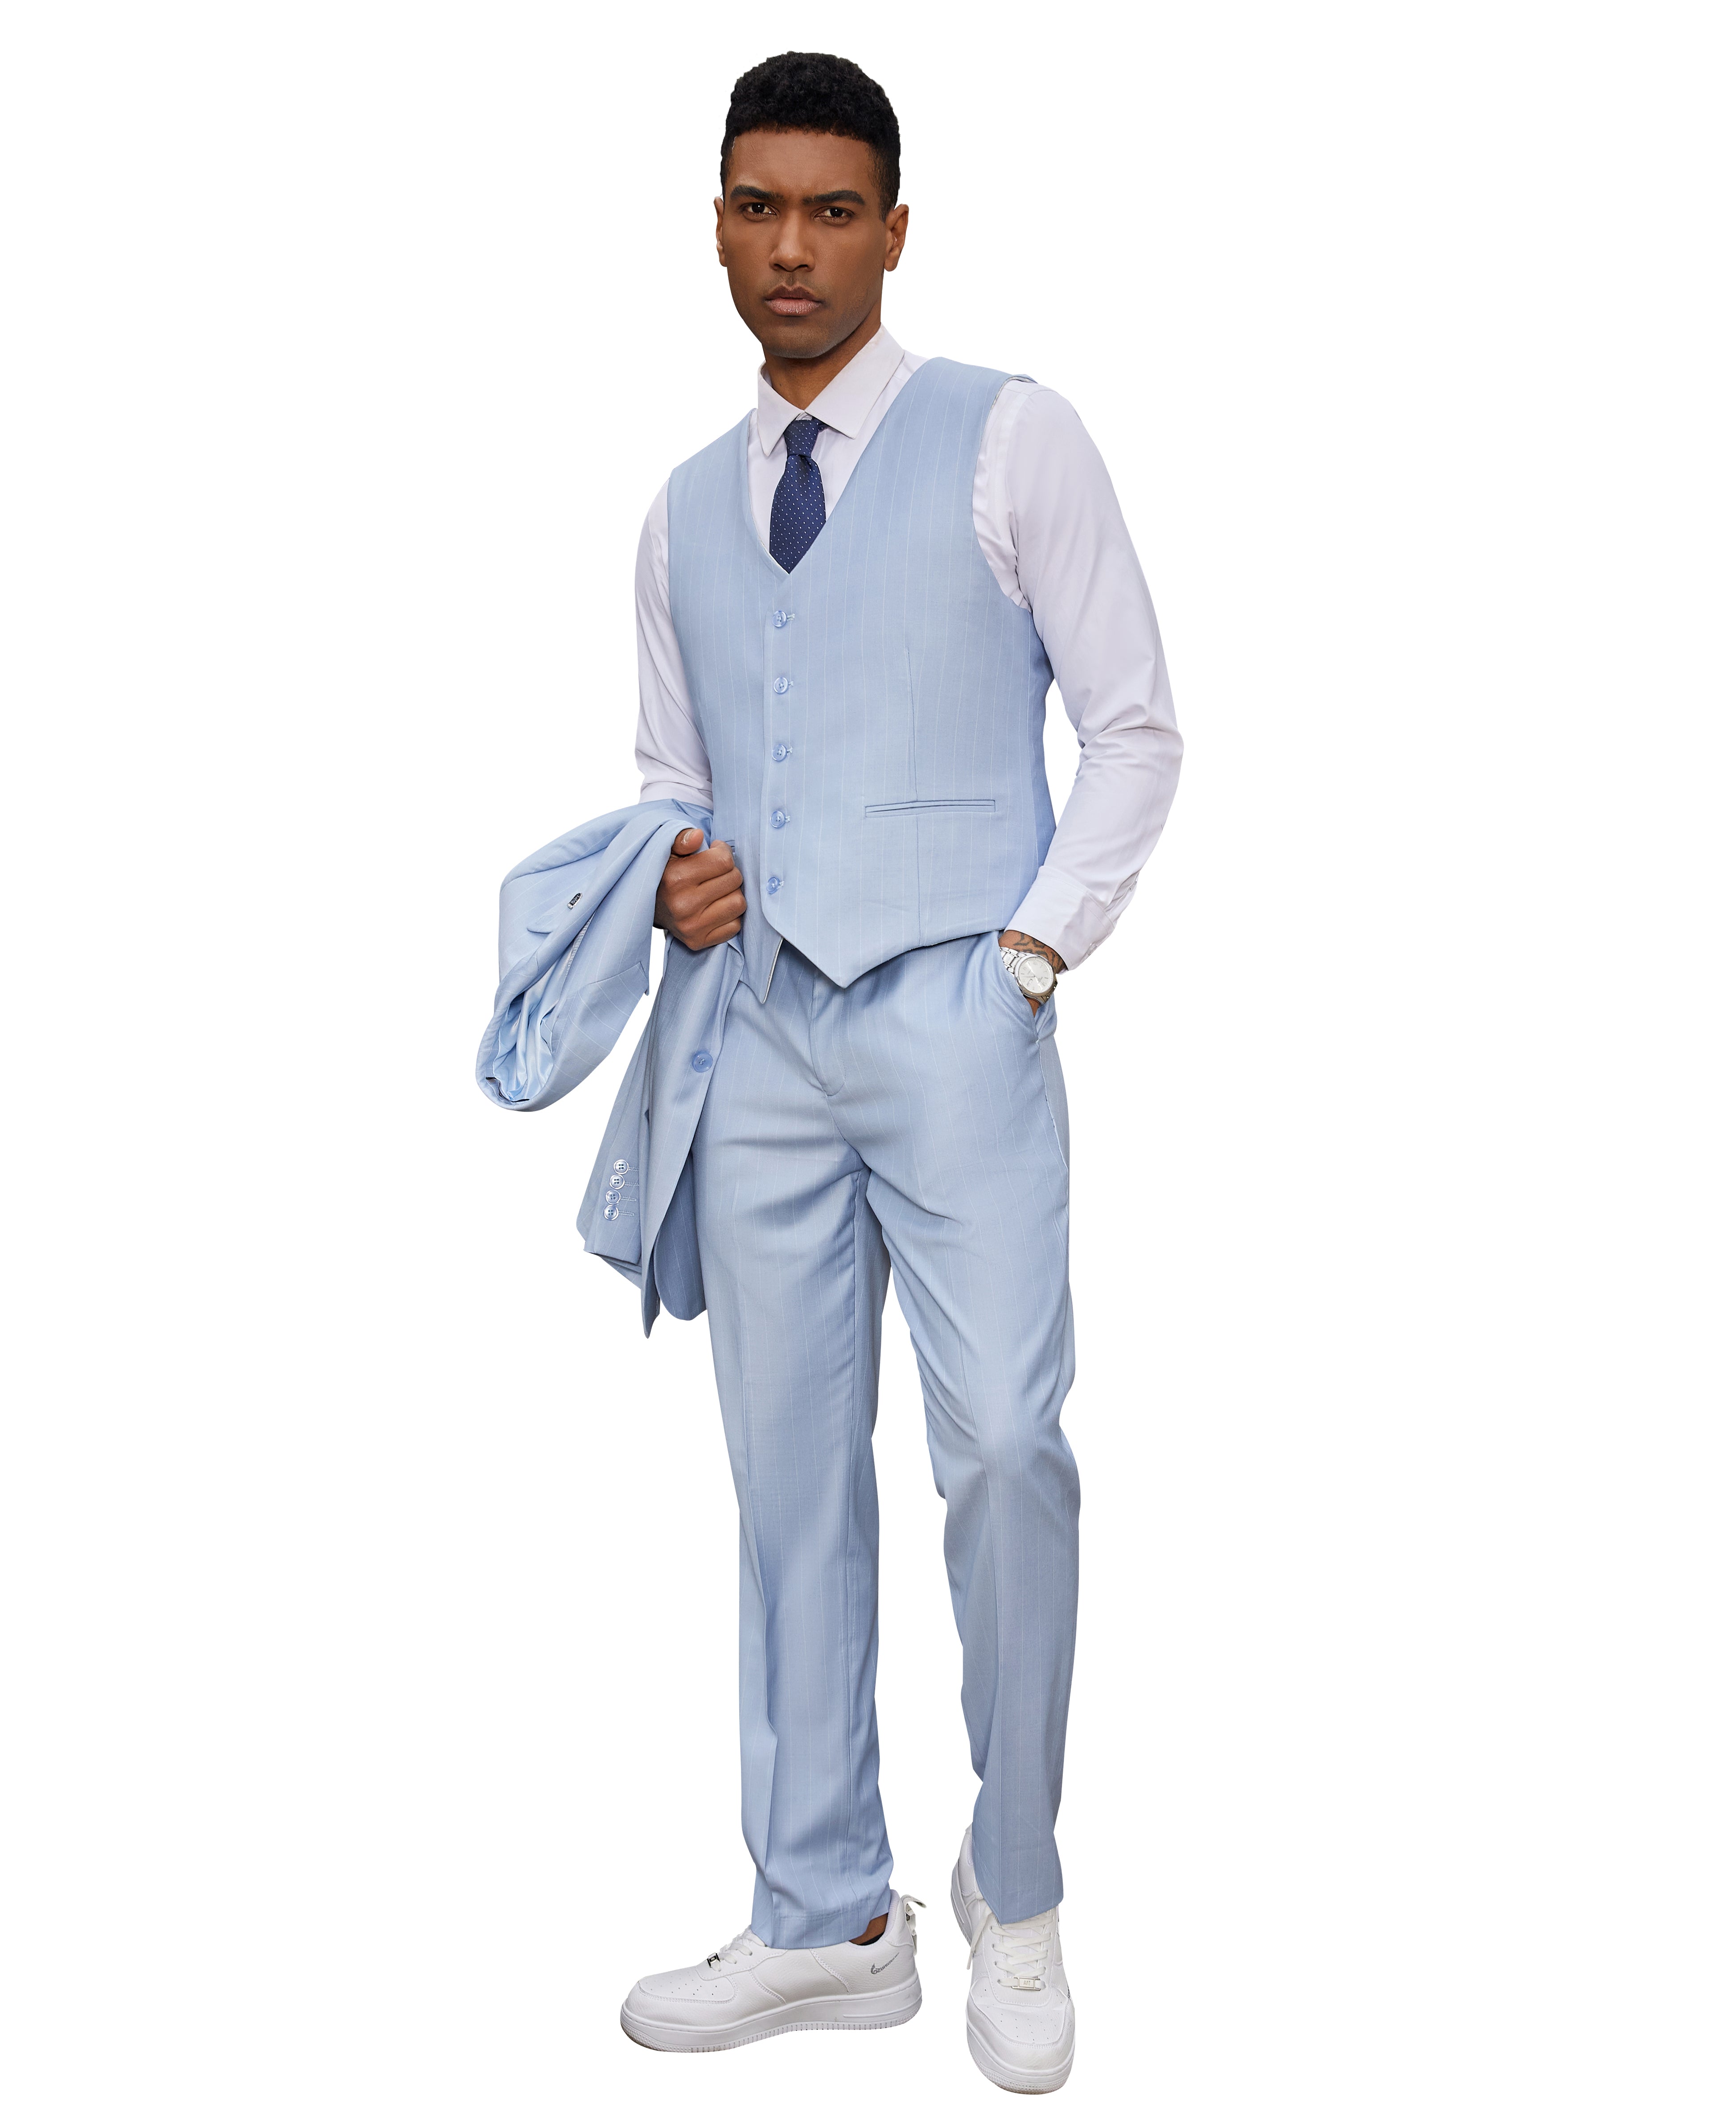 Stacy Adams Hybrid-Fit Vested Suit, Light Blue Pinstriped